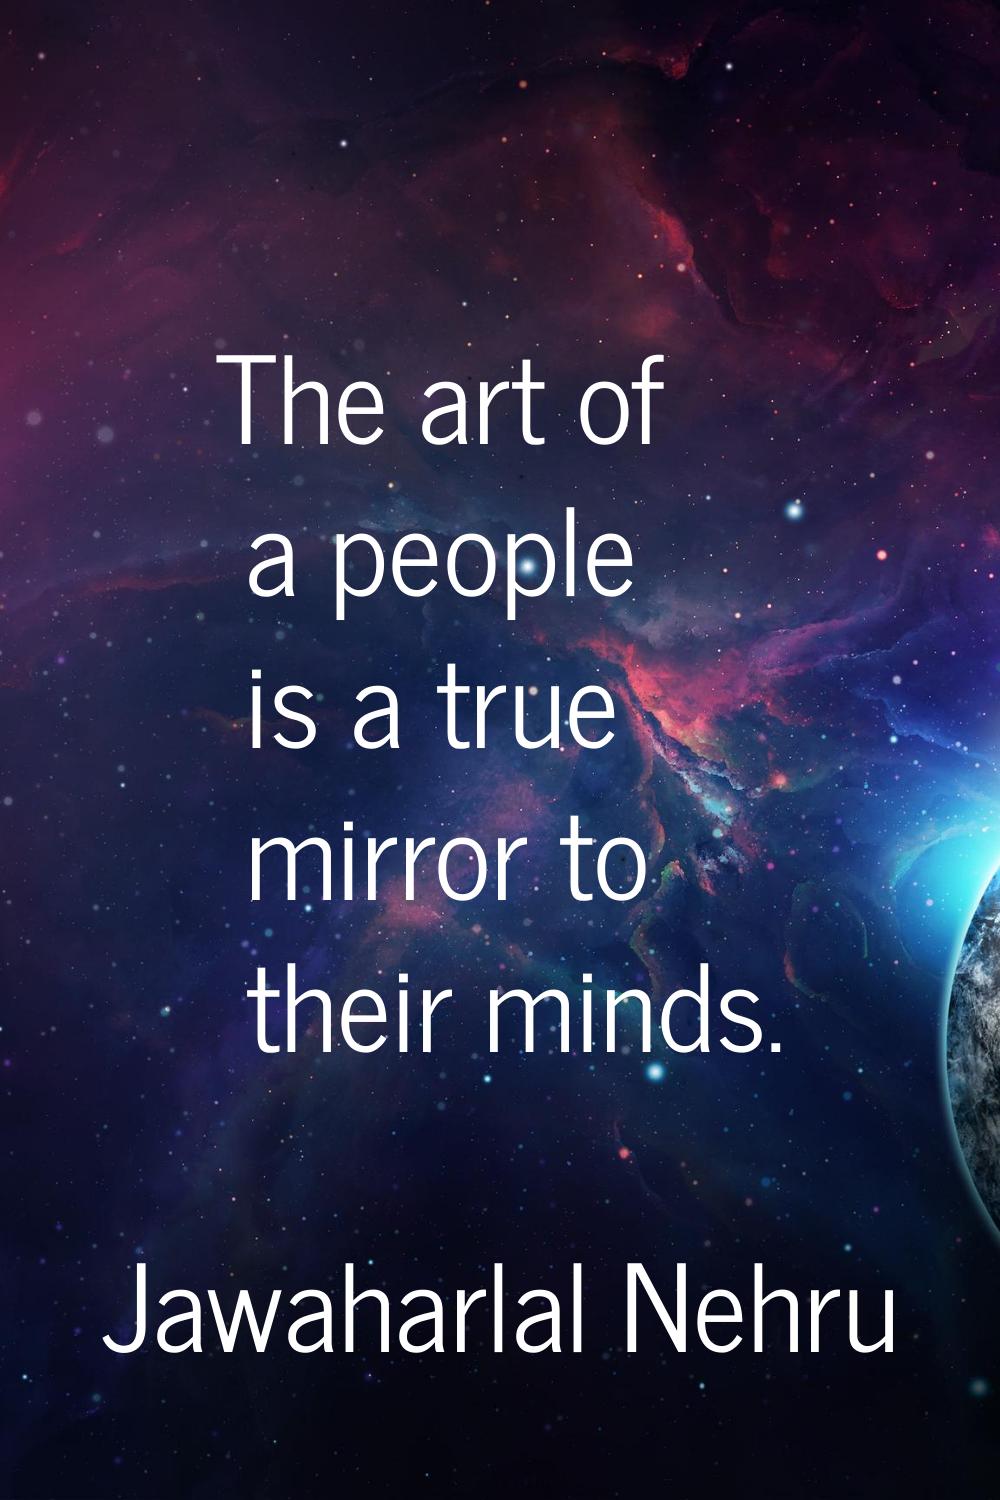 The art of a people is a true mirror to their minds.